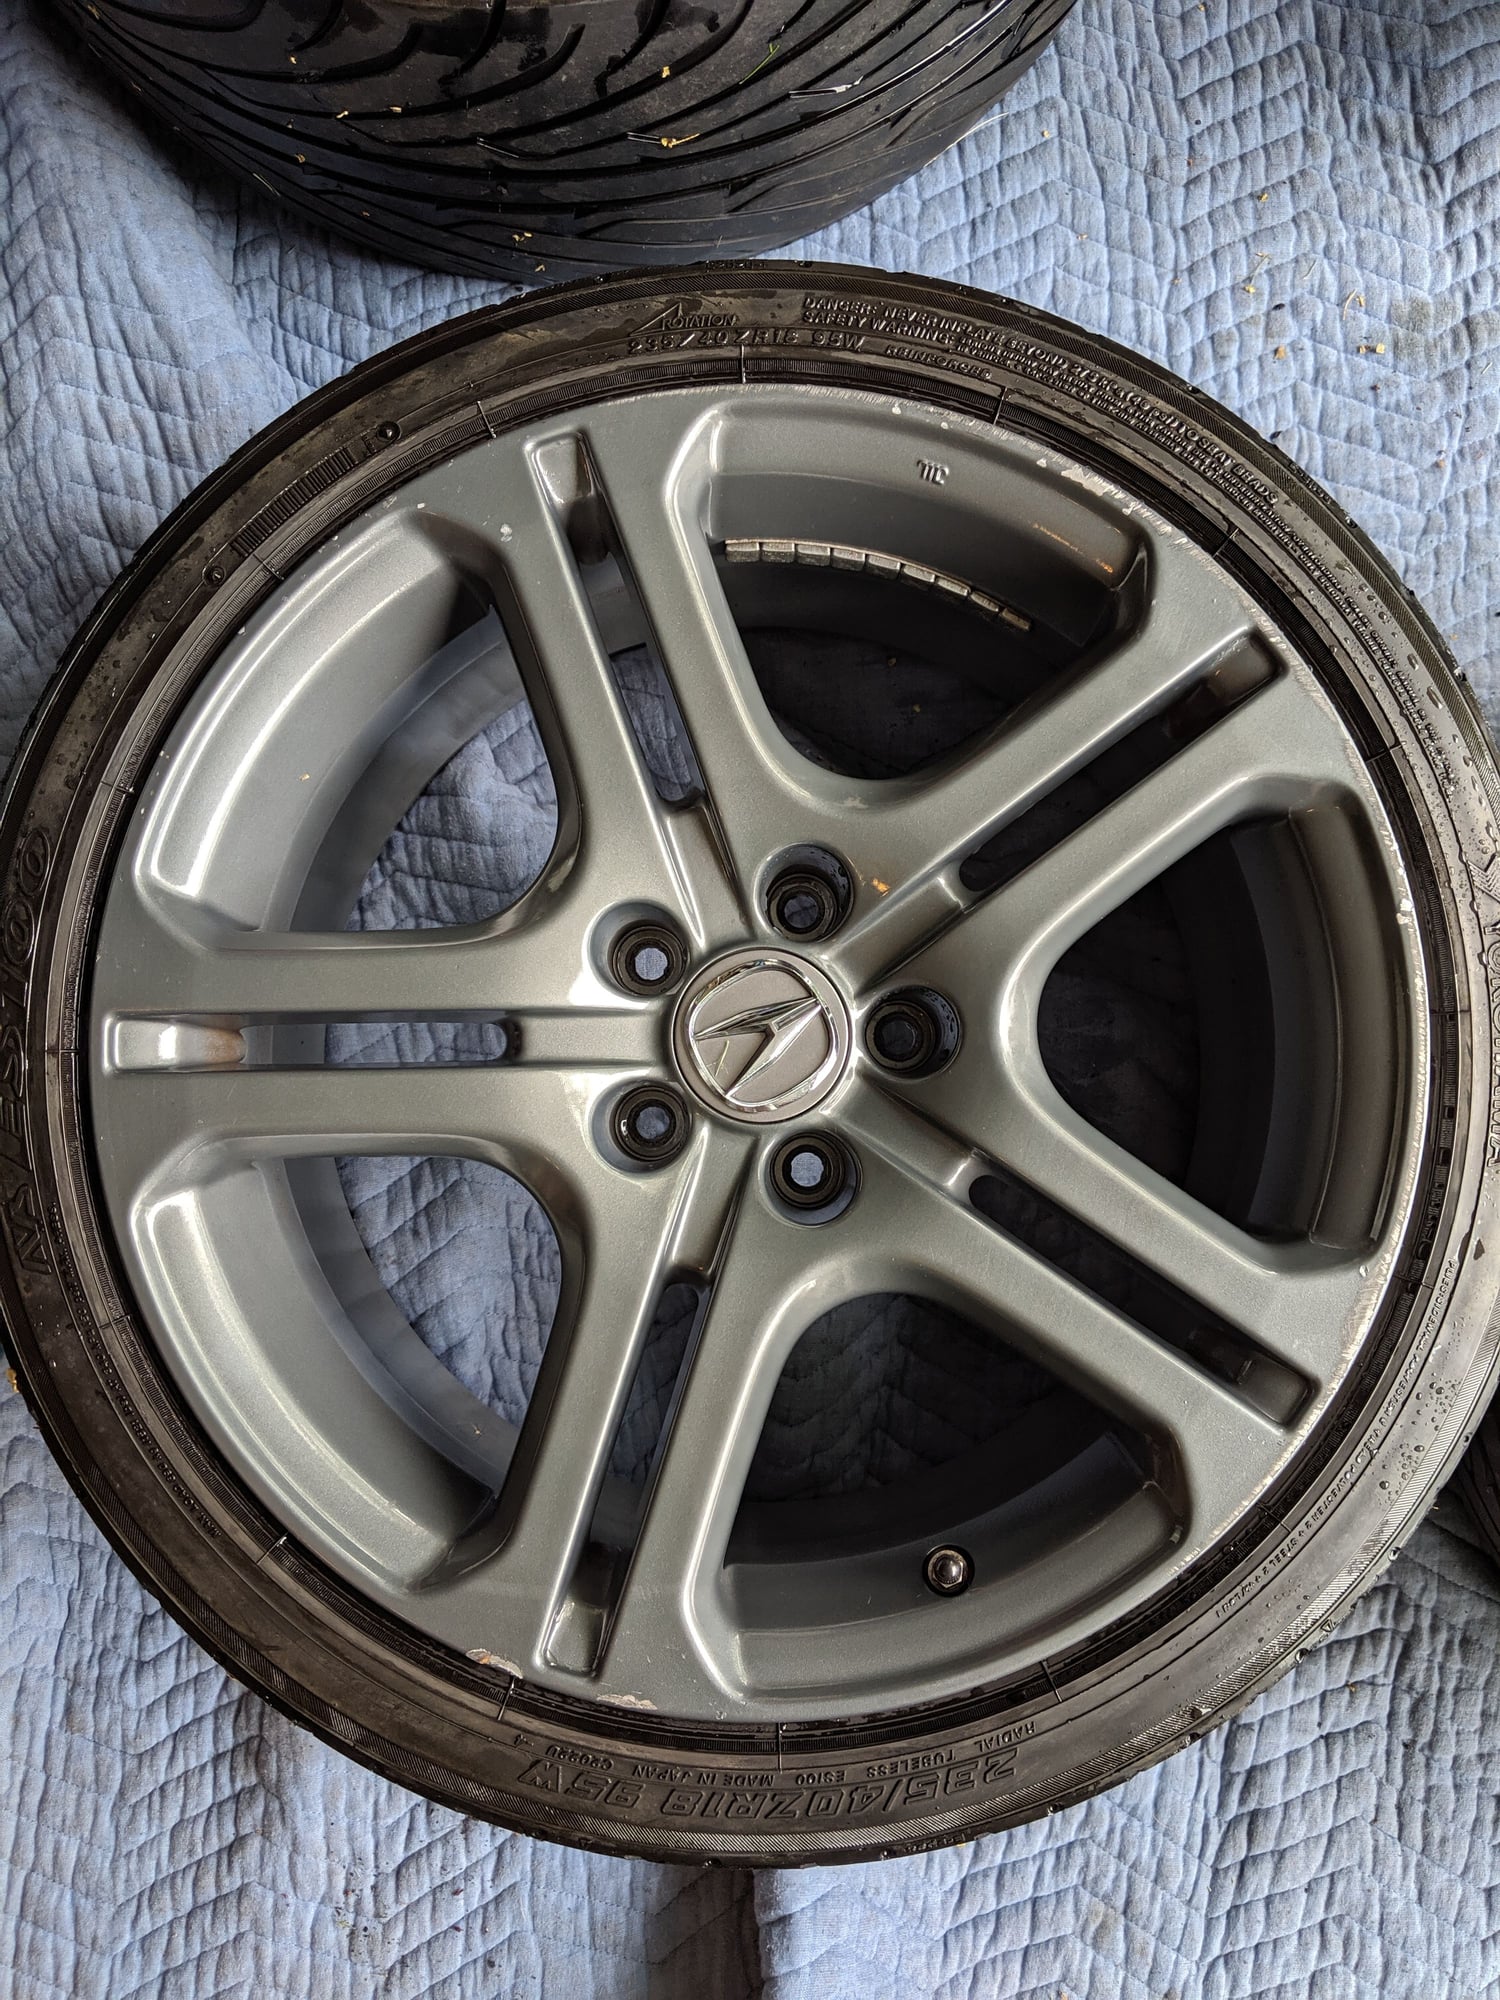 Wheels and Tires/Axles - FS: 18"x8.5" A-Spec Wheels - Used - 2004 to 2008 Acura TL - Chicago, IL 60007, United States